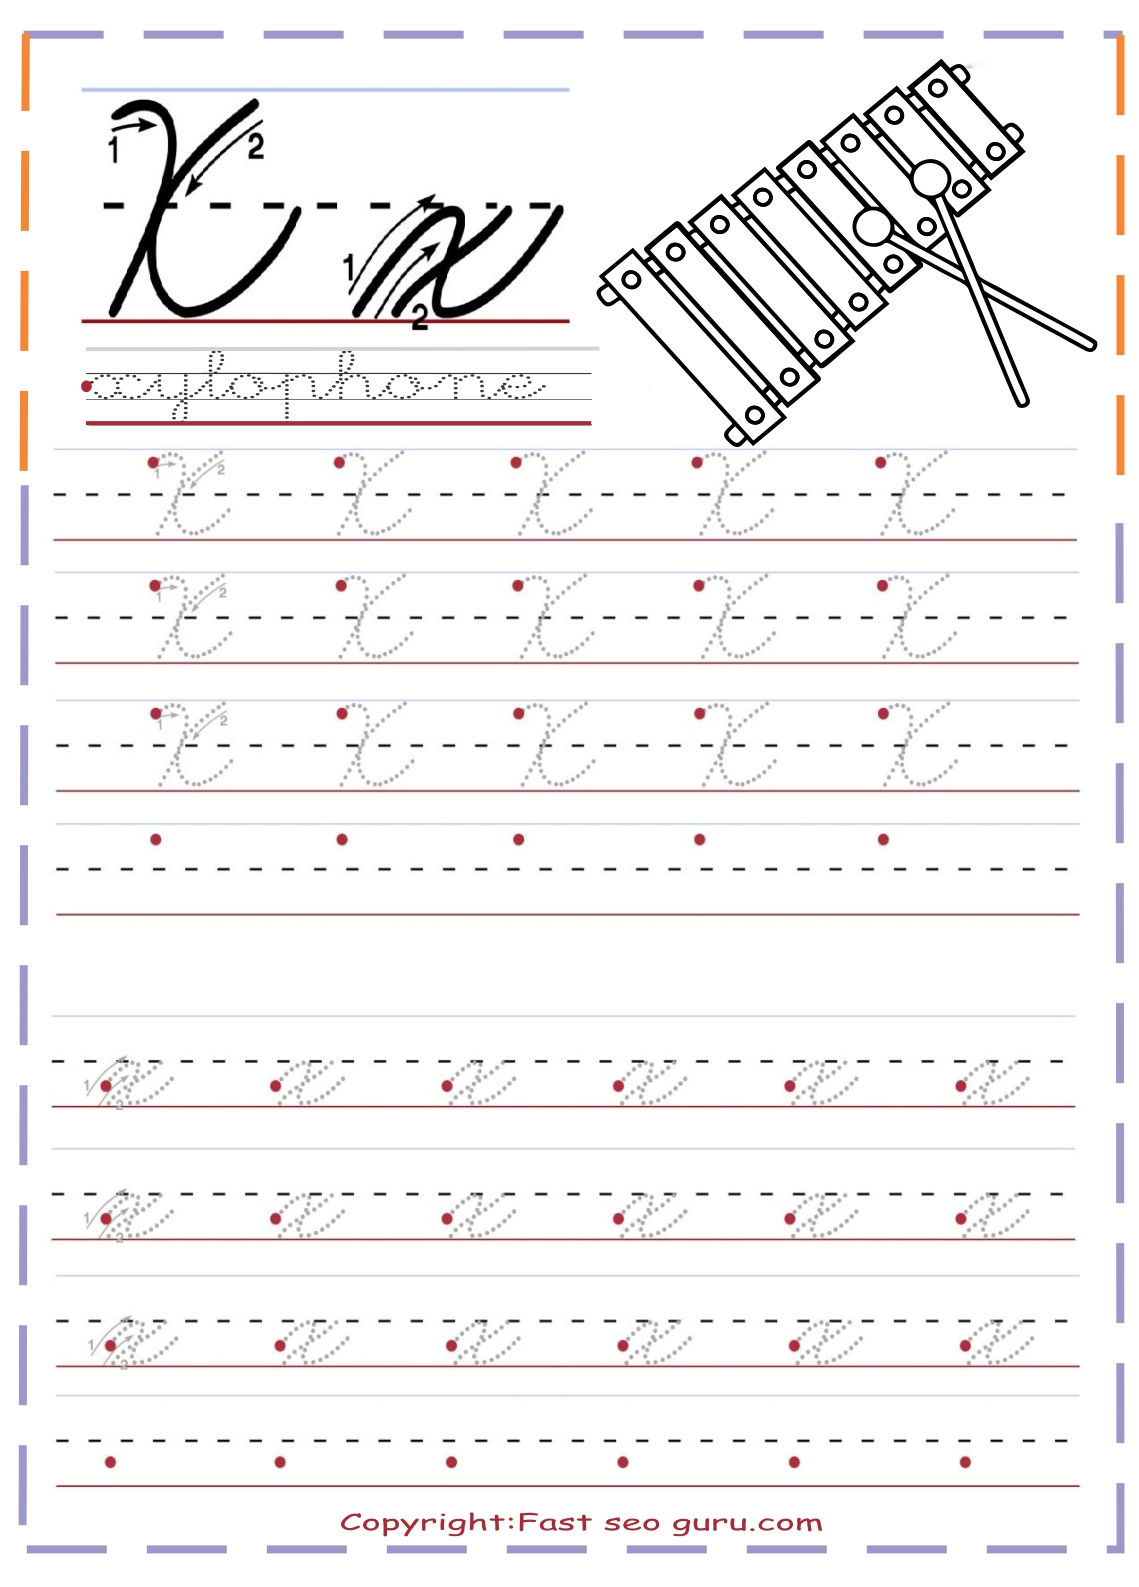 cursive handwriting tracing worksheets letter x for xylophone